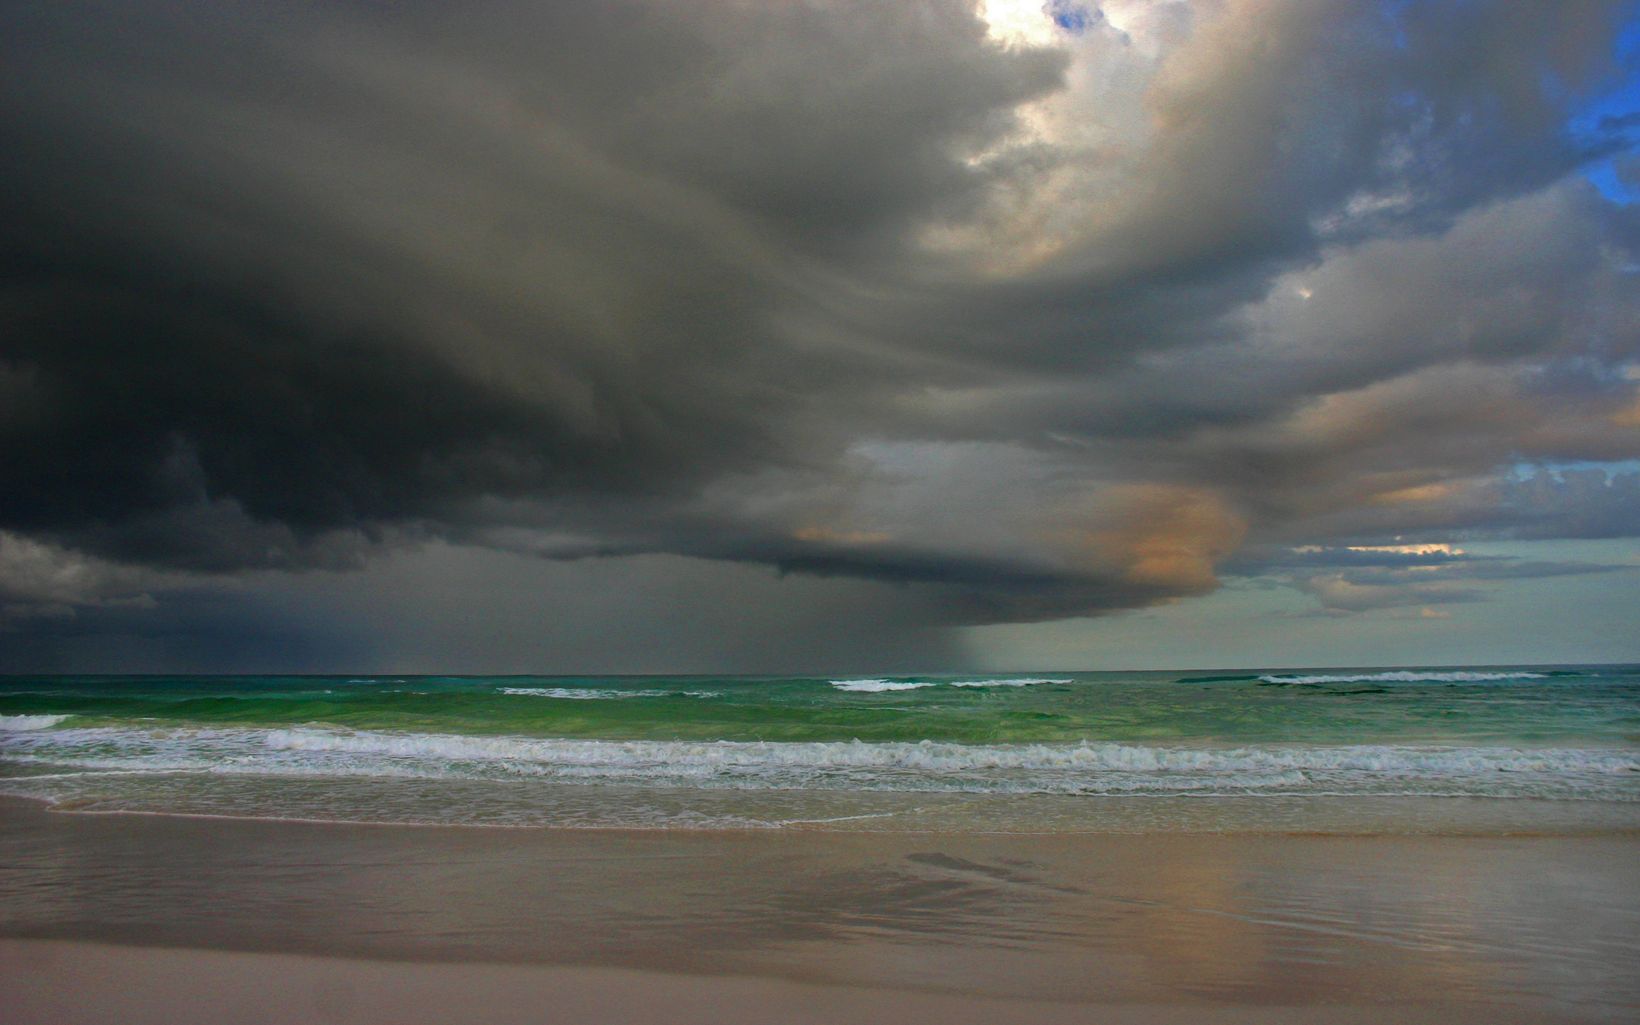 A powerful tropical thunderstorm moves along the coast.